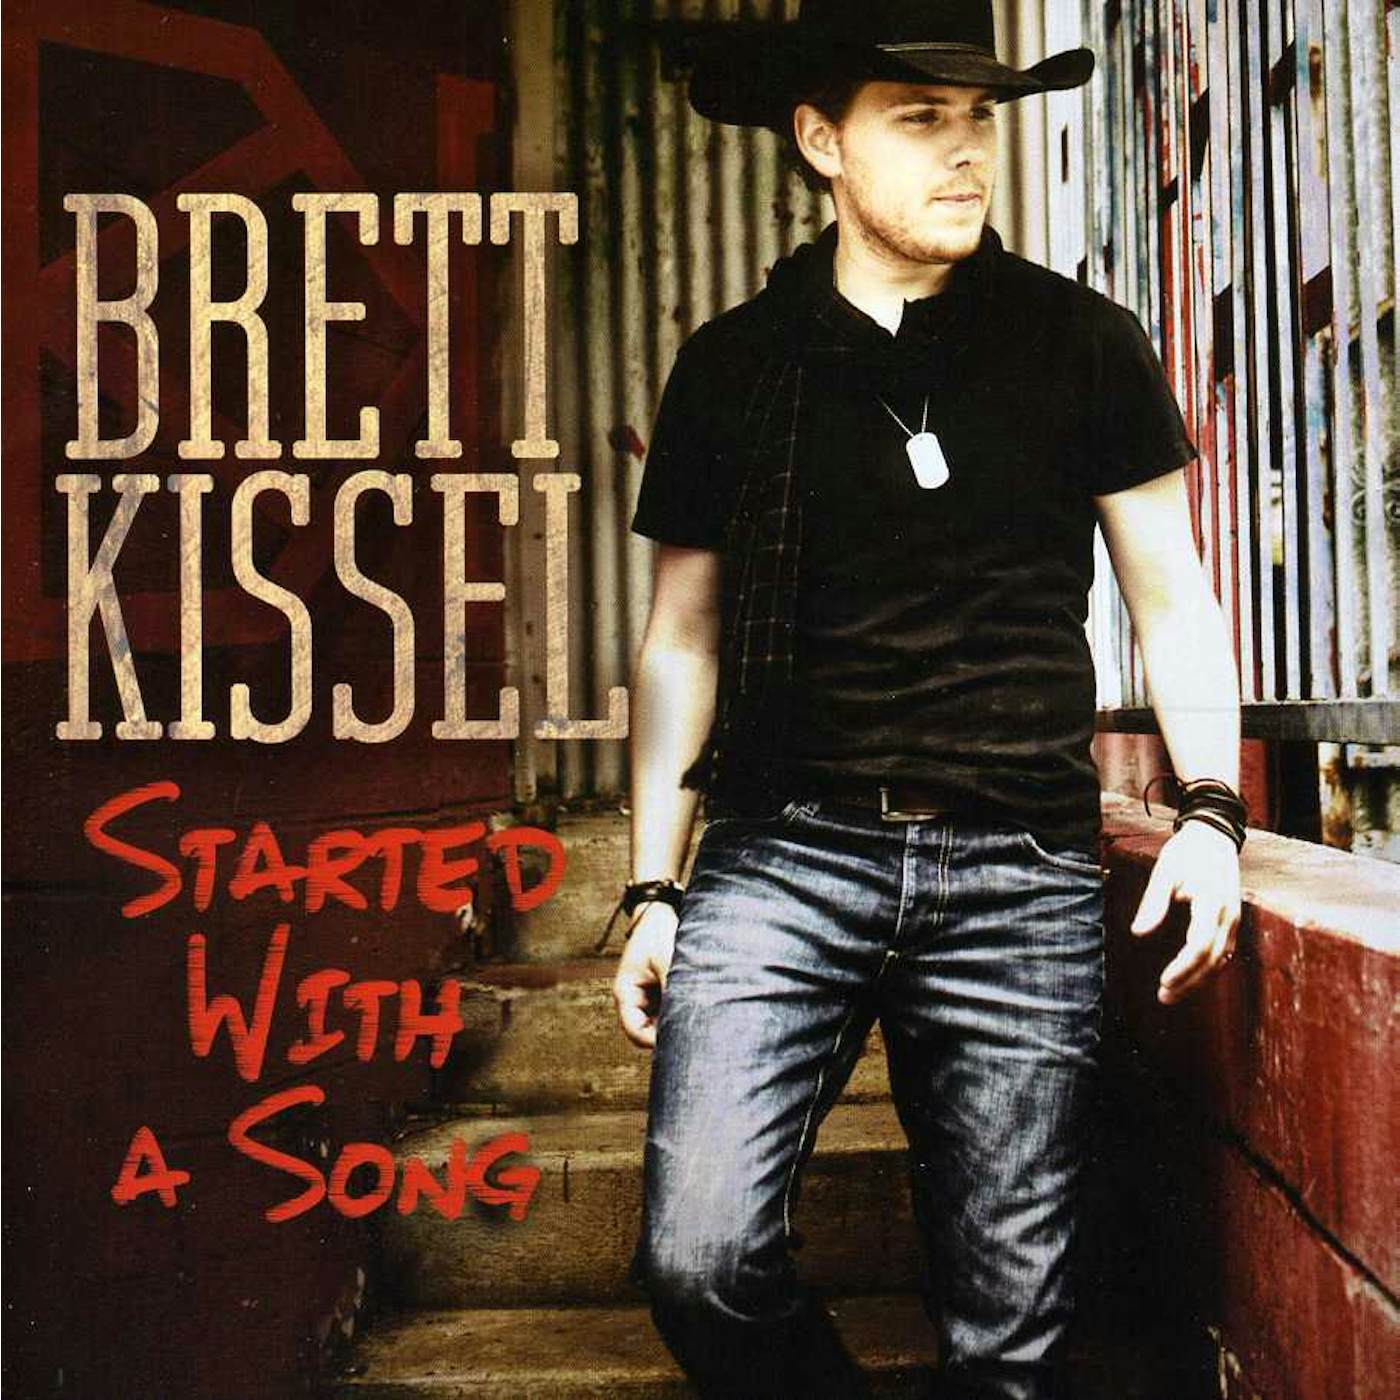 Brett Kissel STARTED WITH A SONG CD